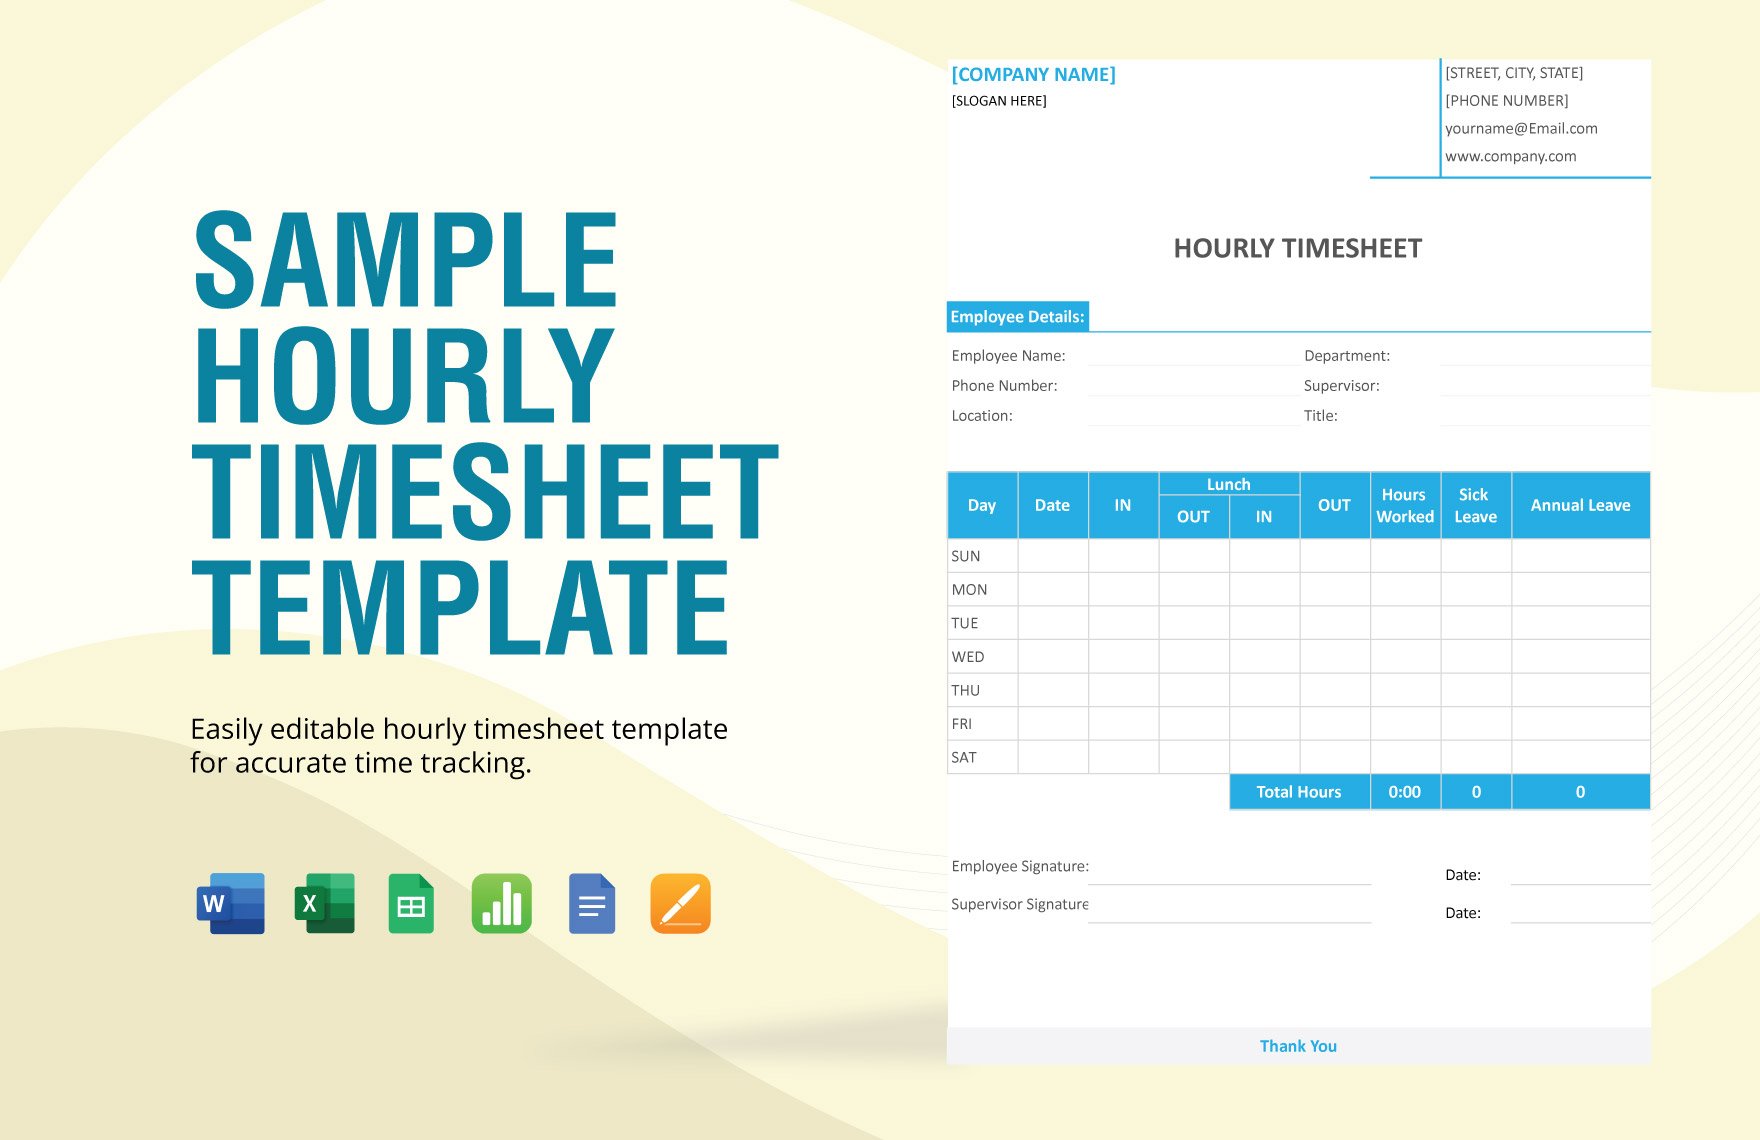 Free Sample Hourly Timesheet Template in Word, Google Docs, Excel, Google Sheets, Apple Pages, Apple Numbers